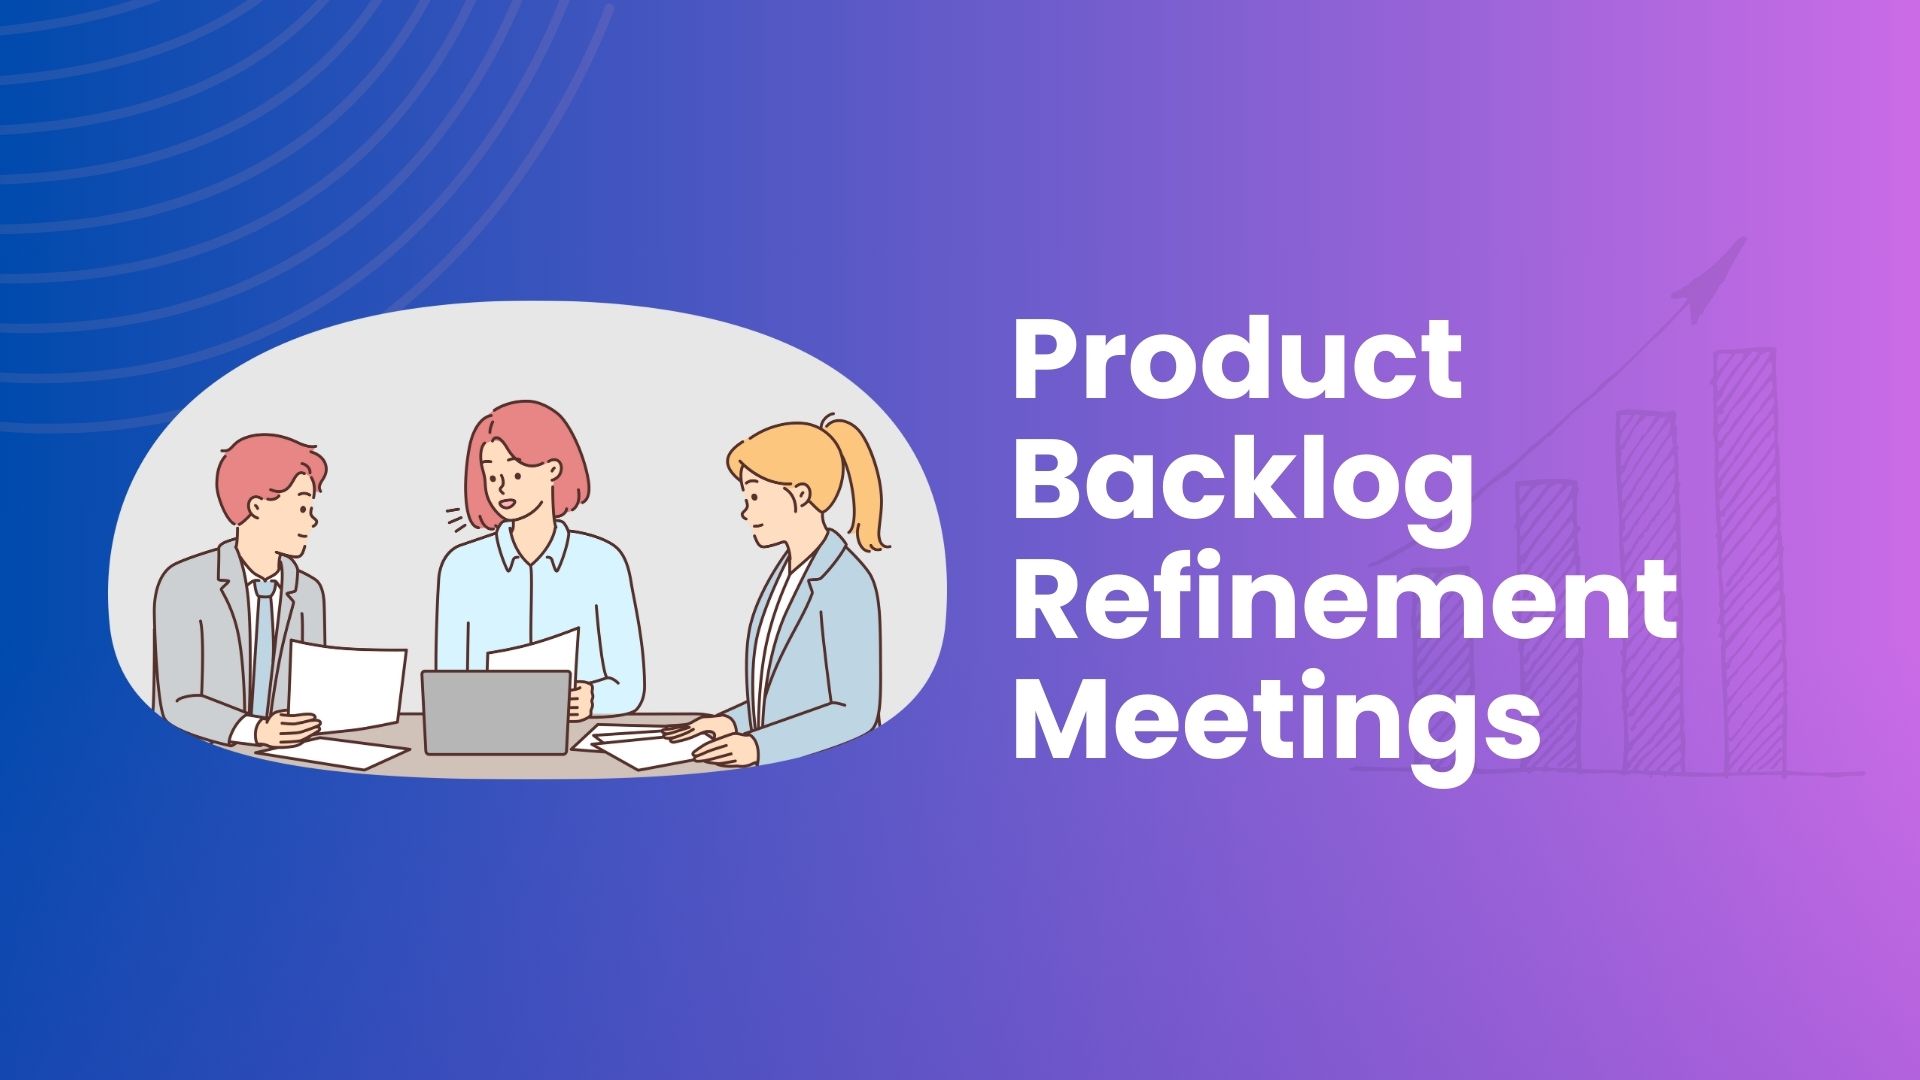 Product Backlog Refinement Meetings